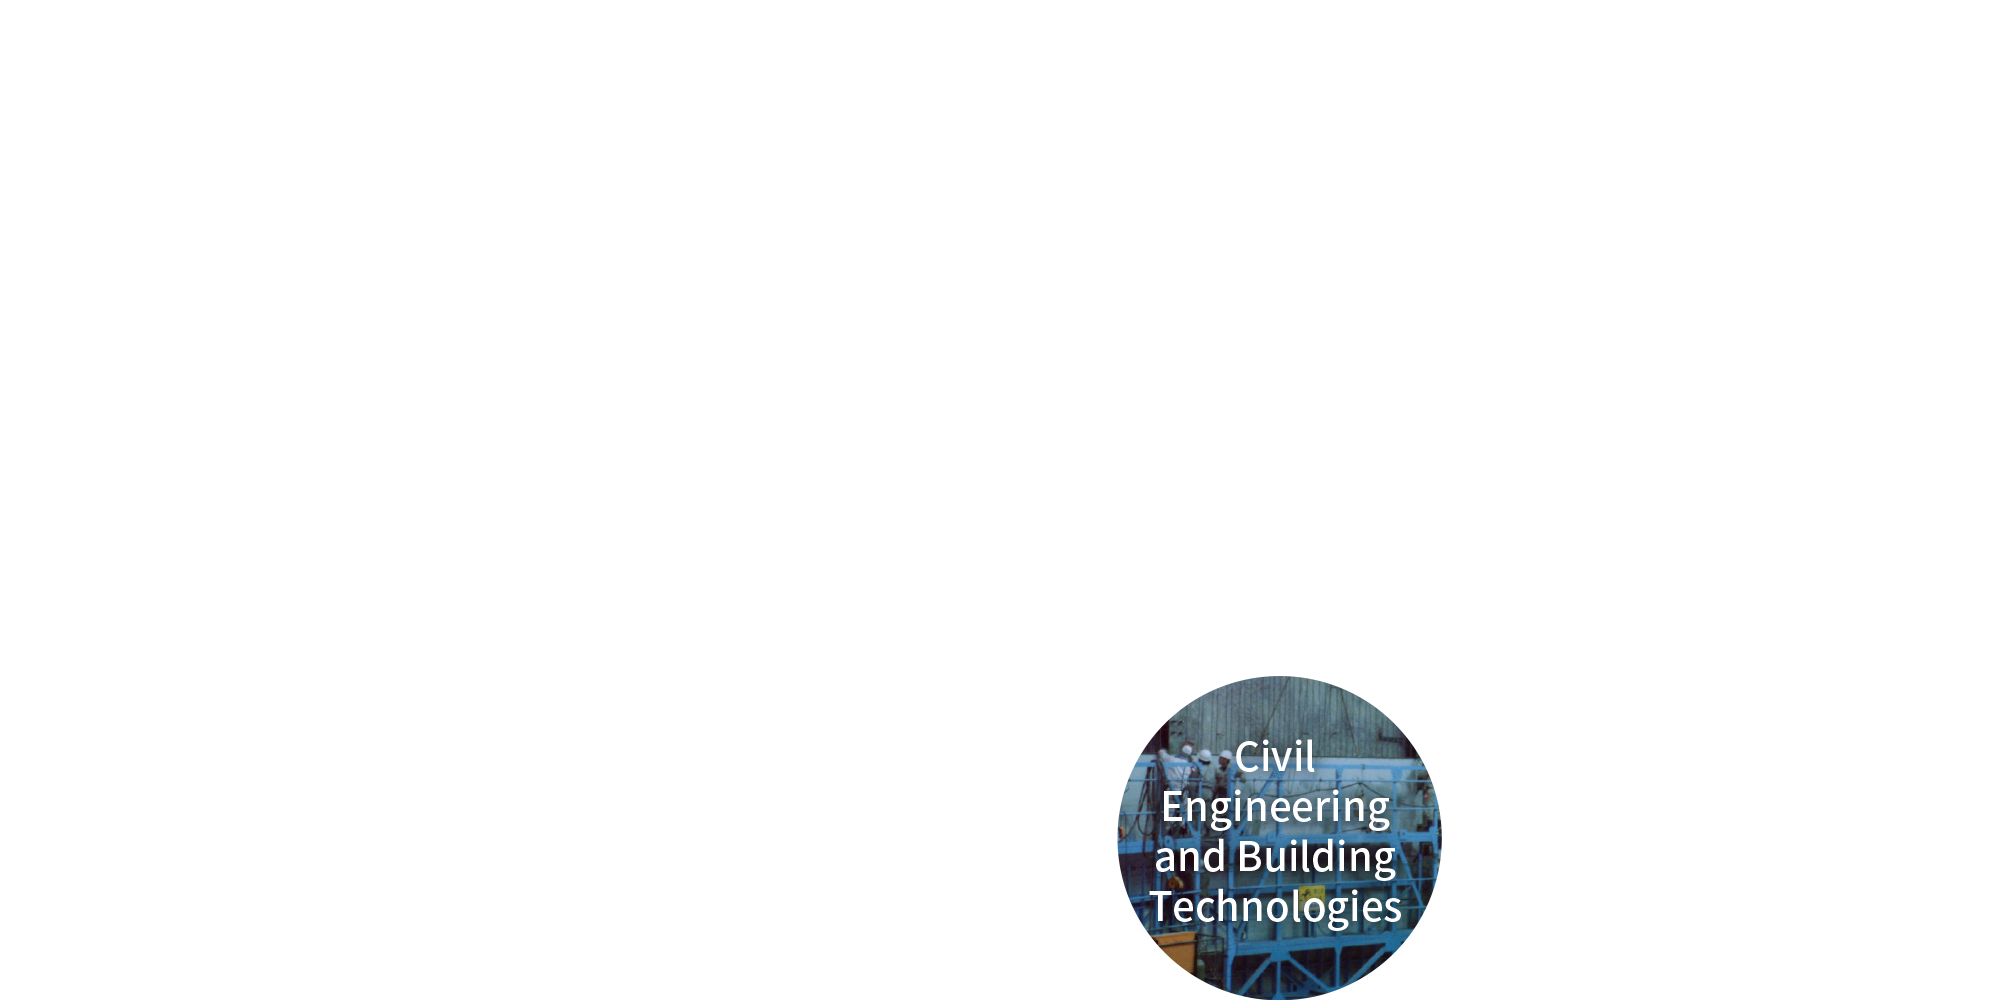 Civil engineering and building technologies